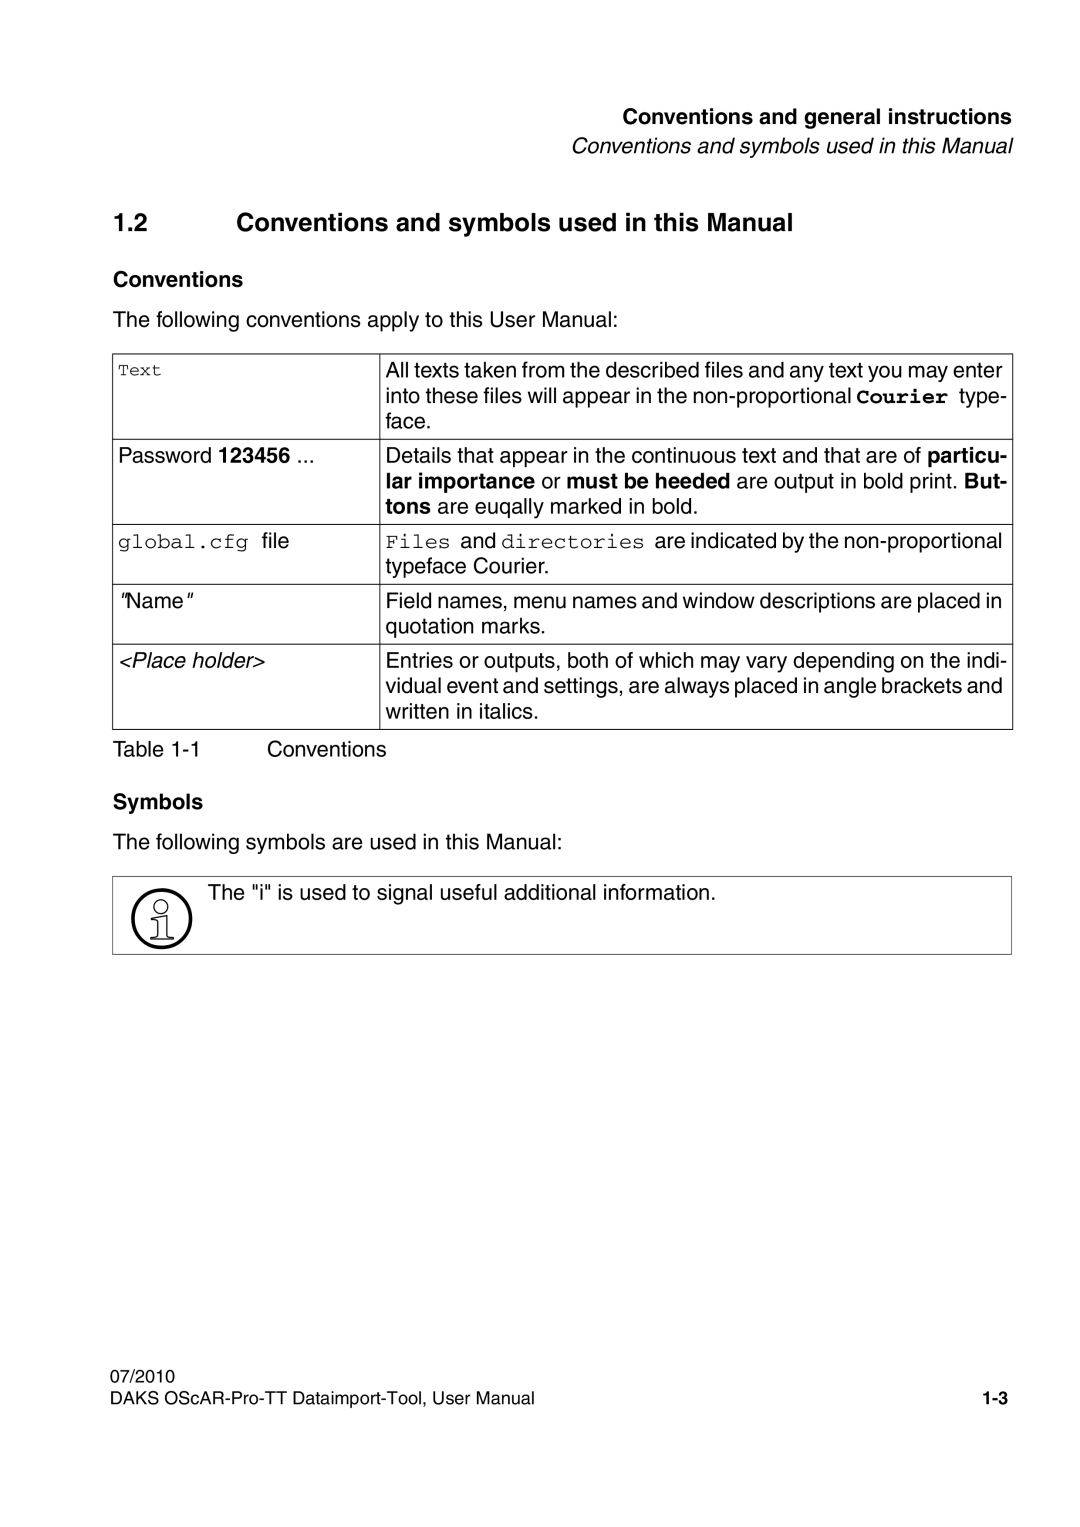 Siemens A31003-S1730-U102-1-7619 user manual 1.2Conventions and symbols used in this Manual, Symbols 